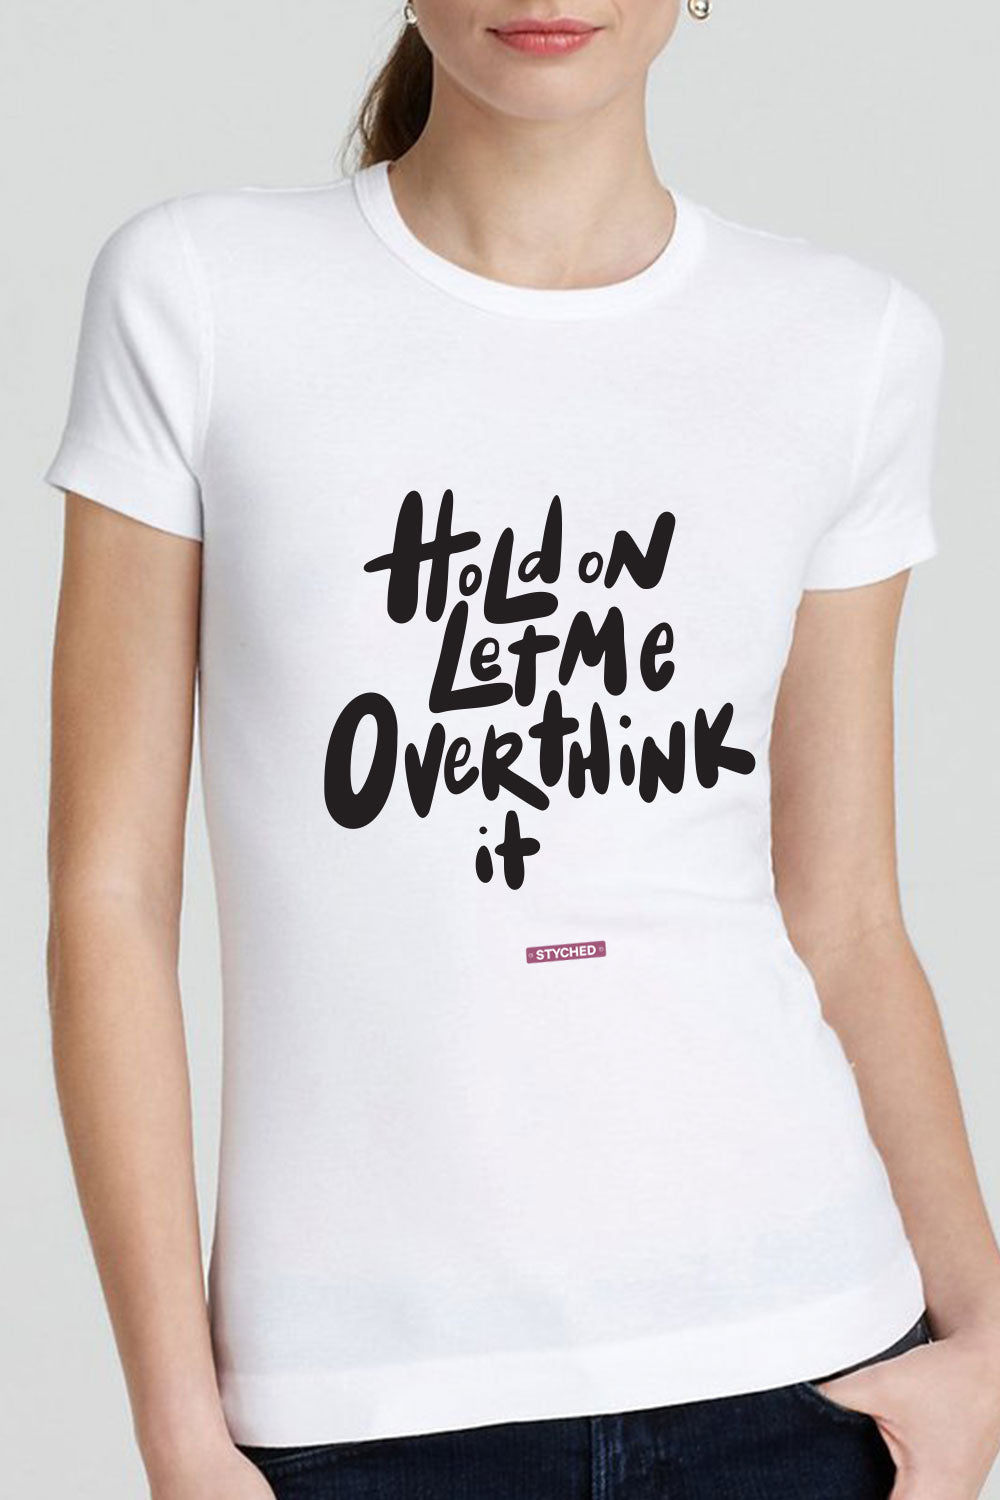 Hold on! Let me overthink it - Quirky Graphic Printed Womens Tee-White